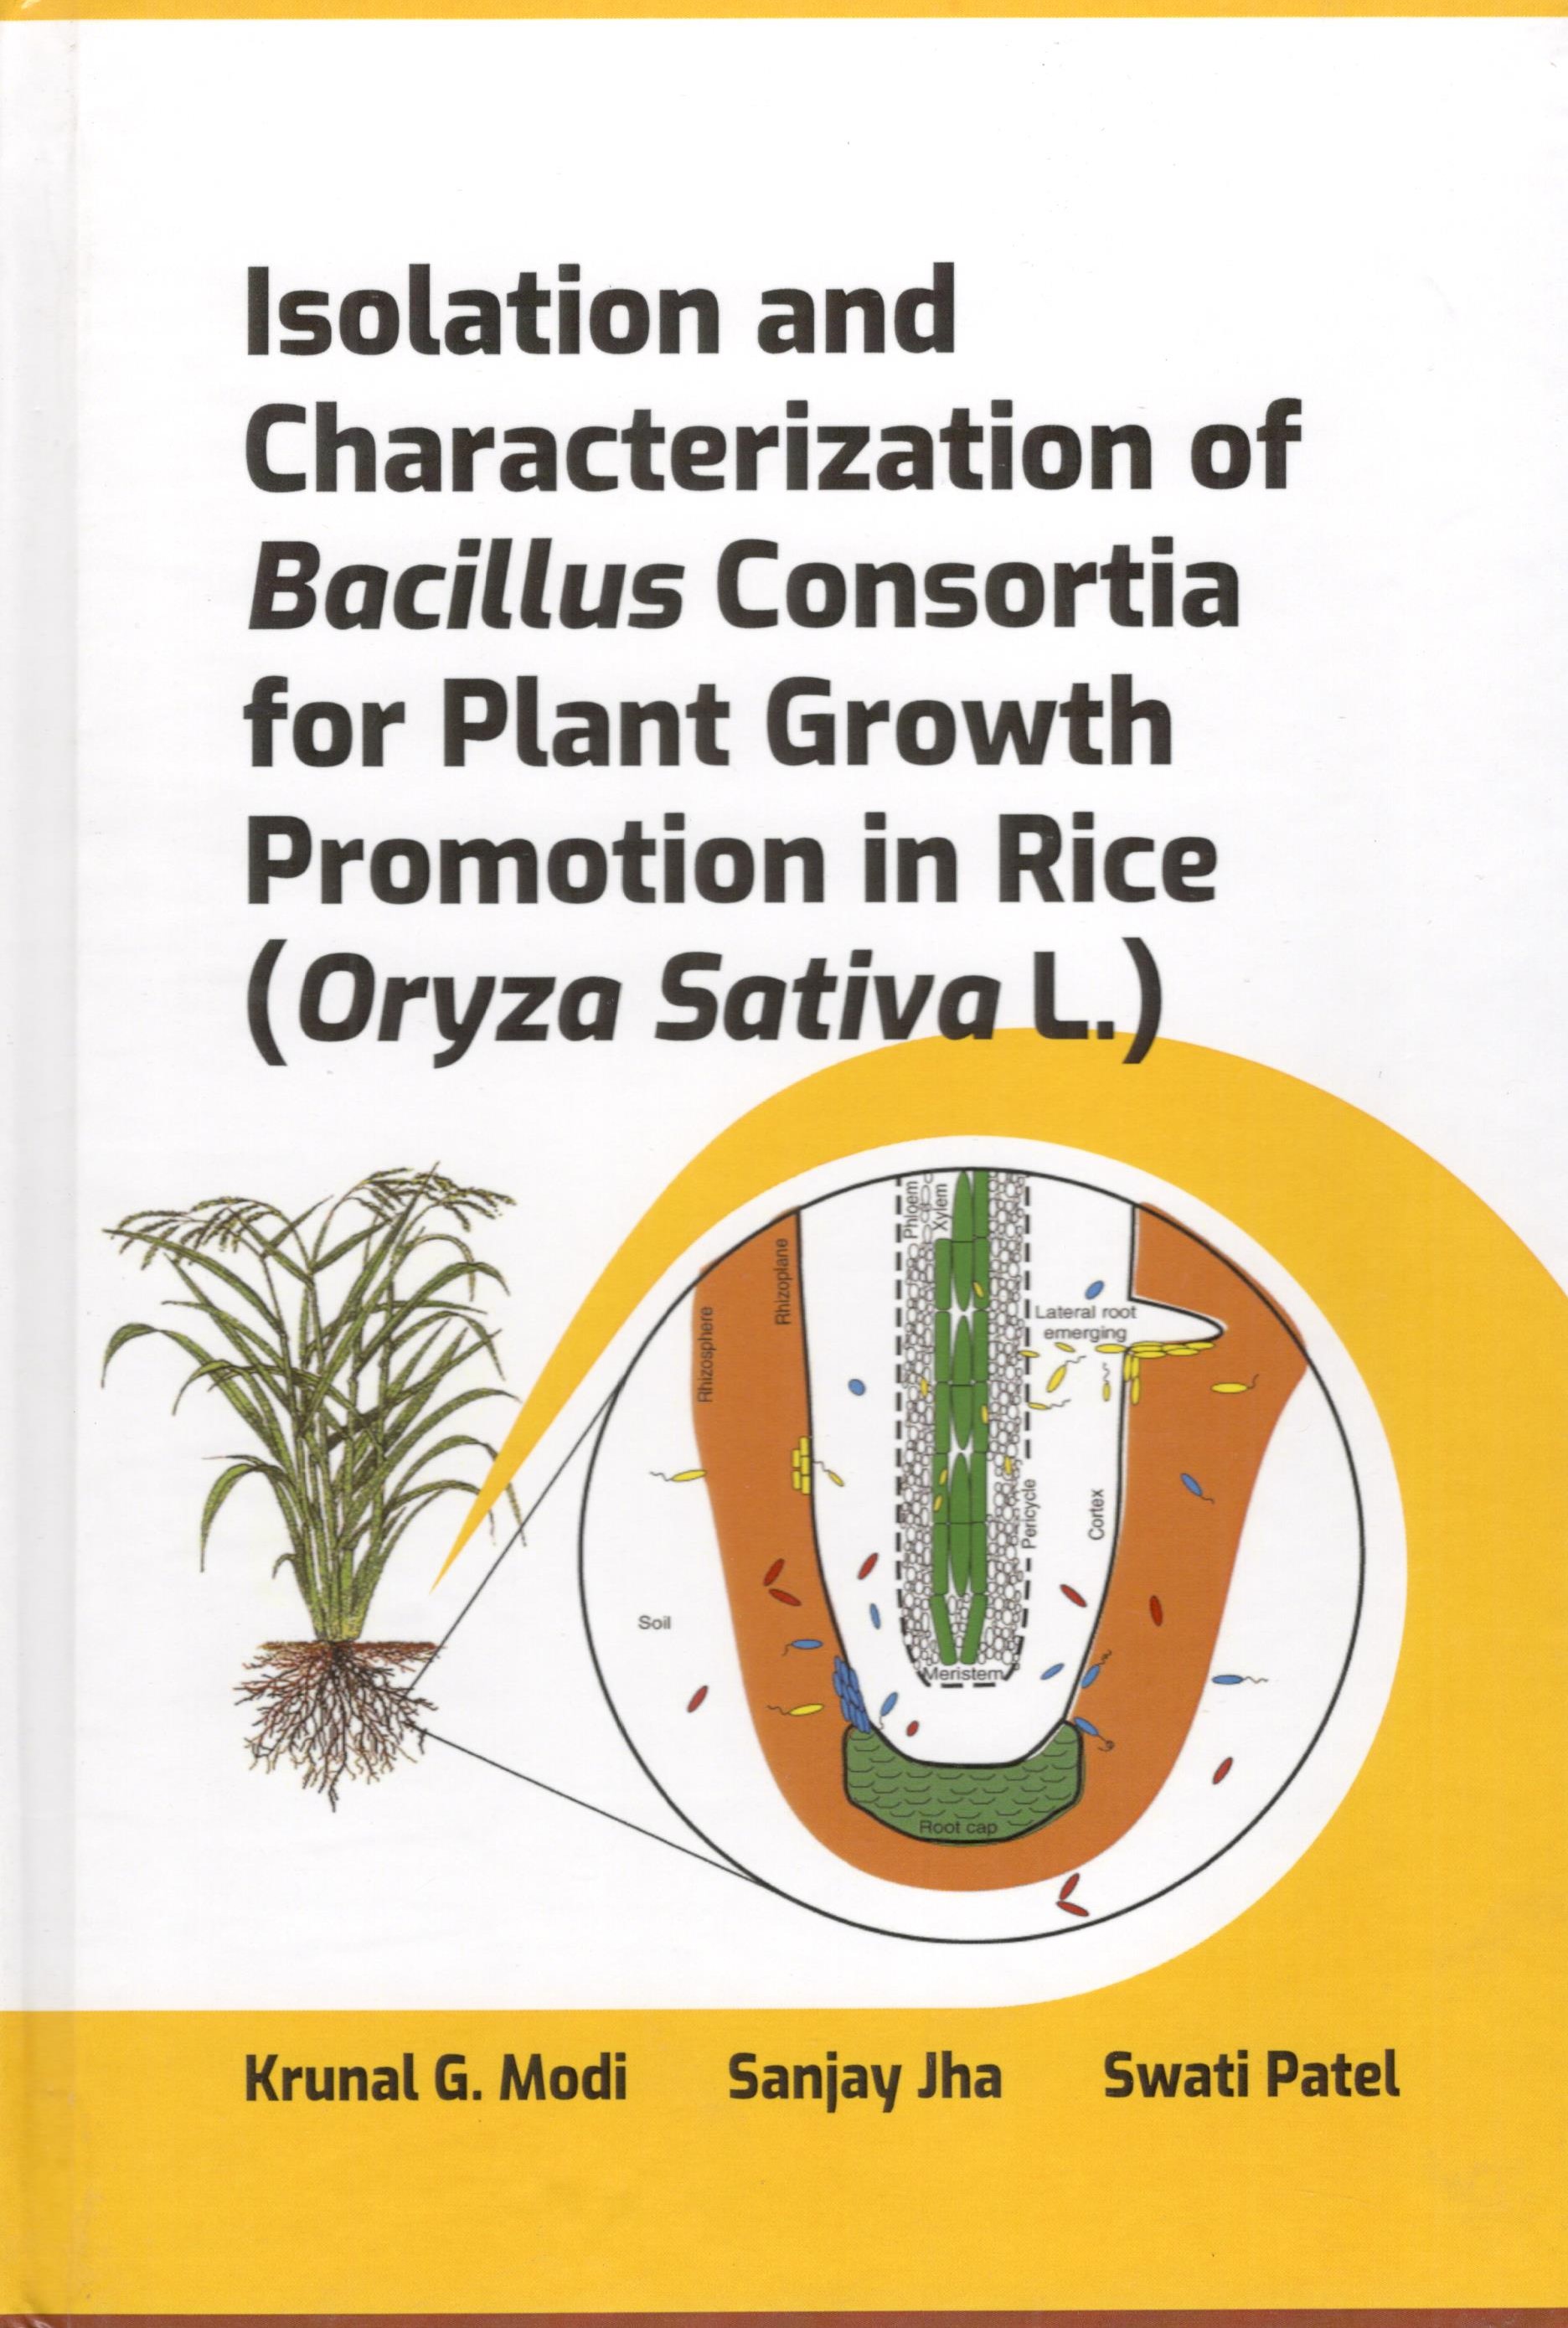 Isolation and Characterization of Bacillus Consortia for Plant Growth Promotion in Rice (Oryza Savita L.)